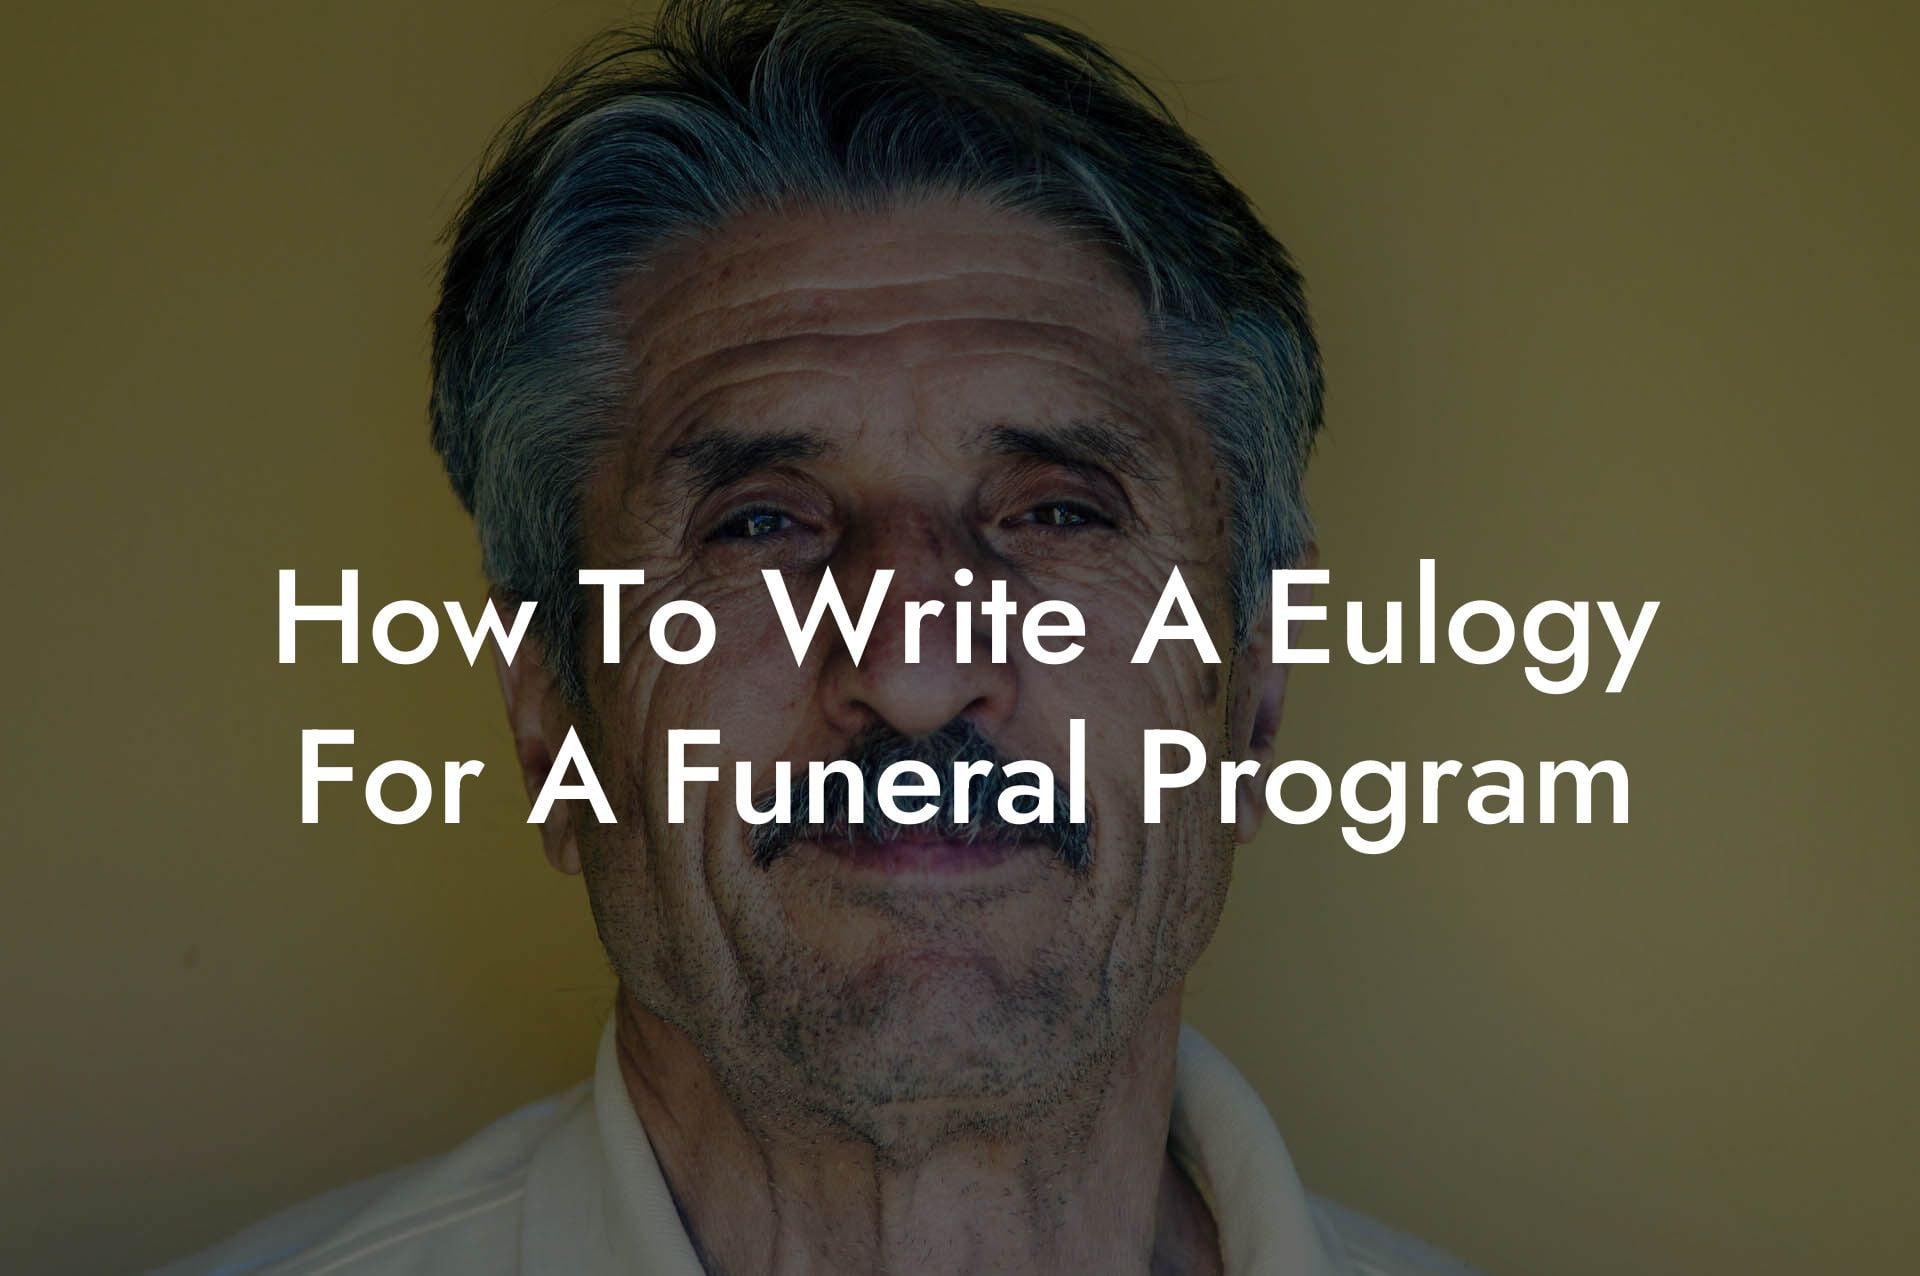 How To Write A Eulogy For A Funeral Program